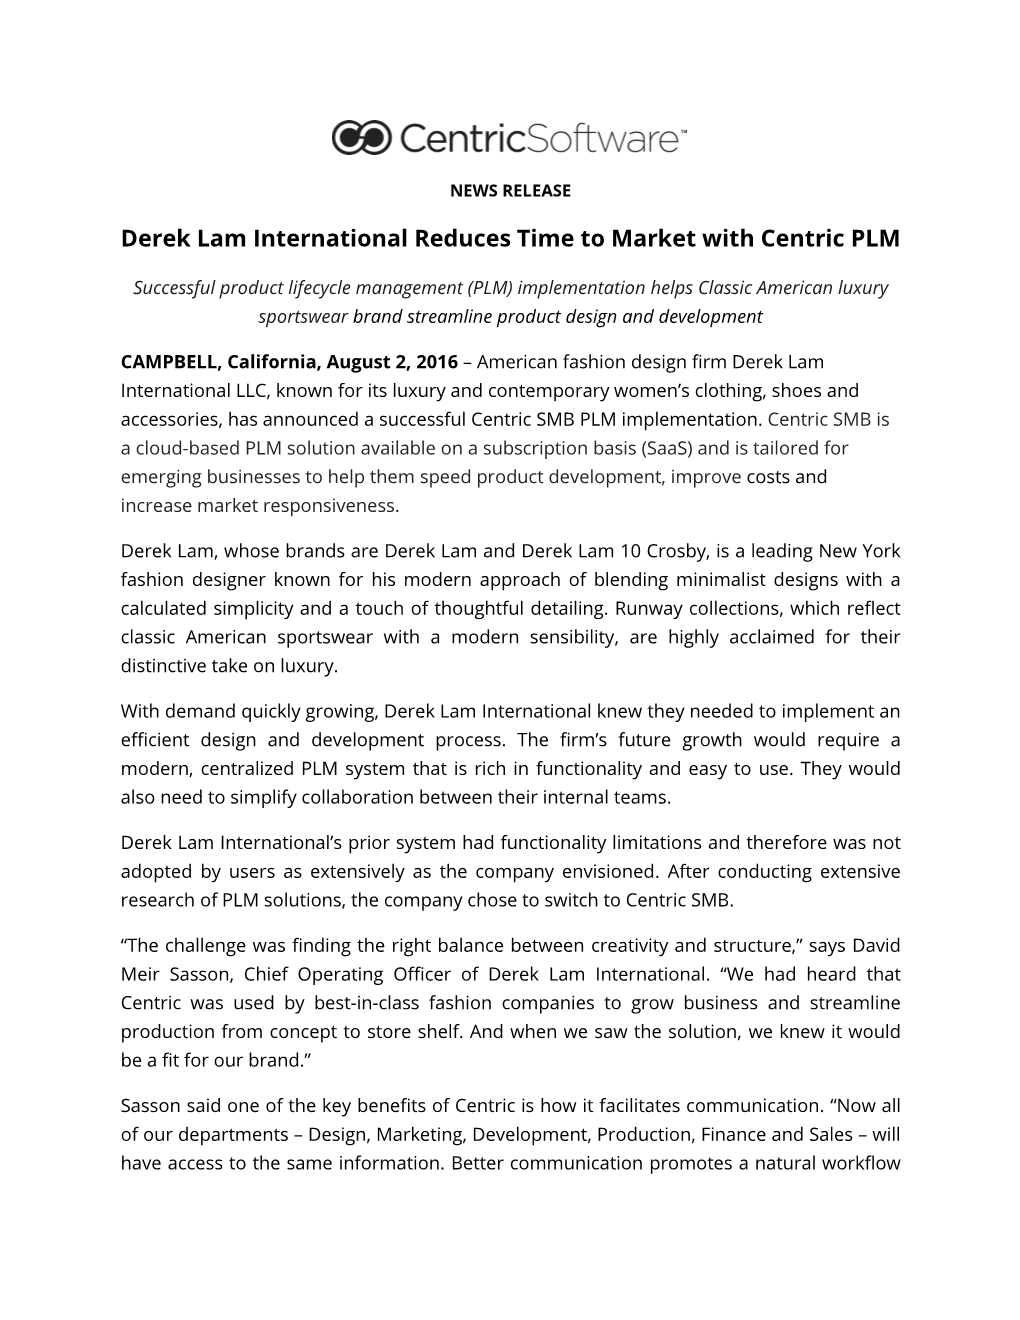 Derek Lam International Reduces Time to Market with Centric PLM